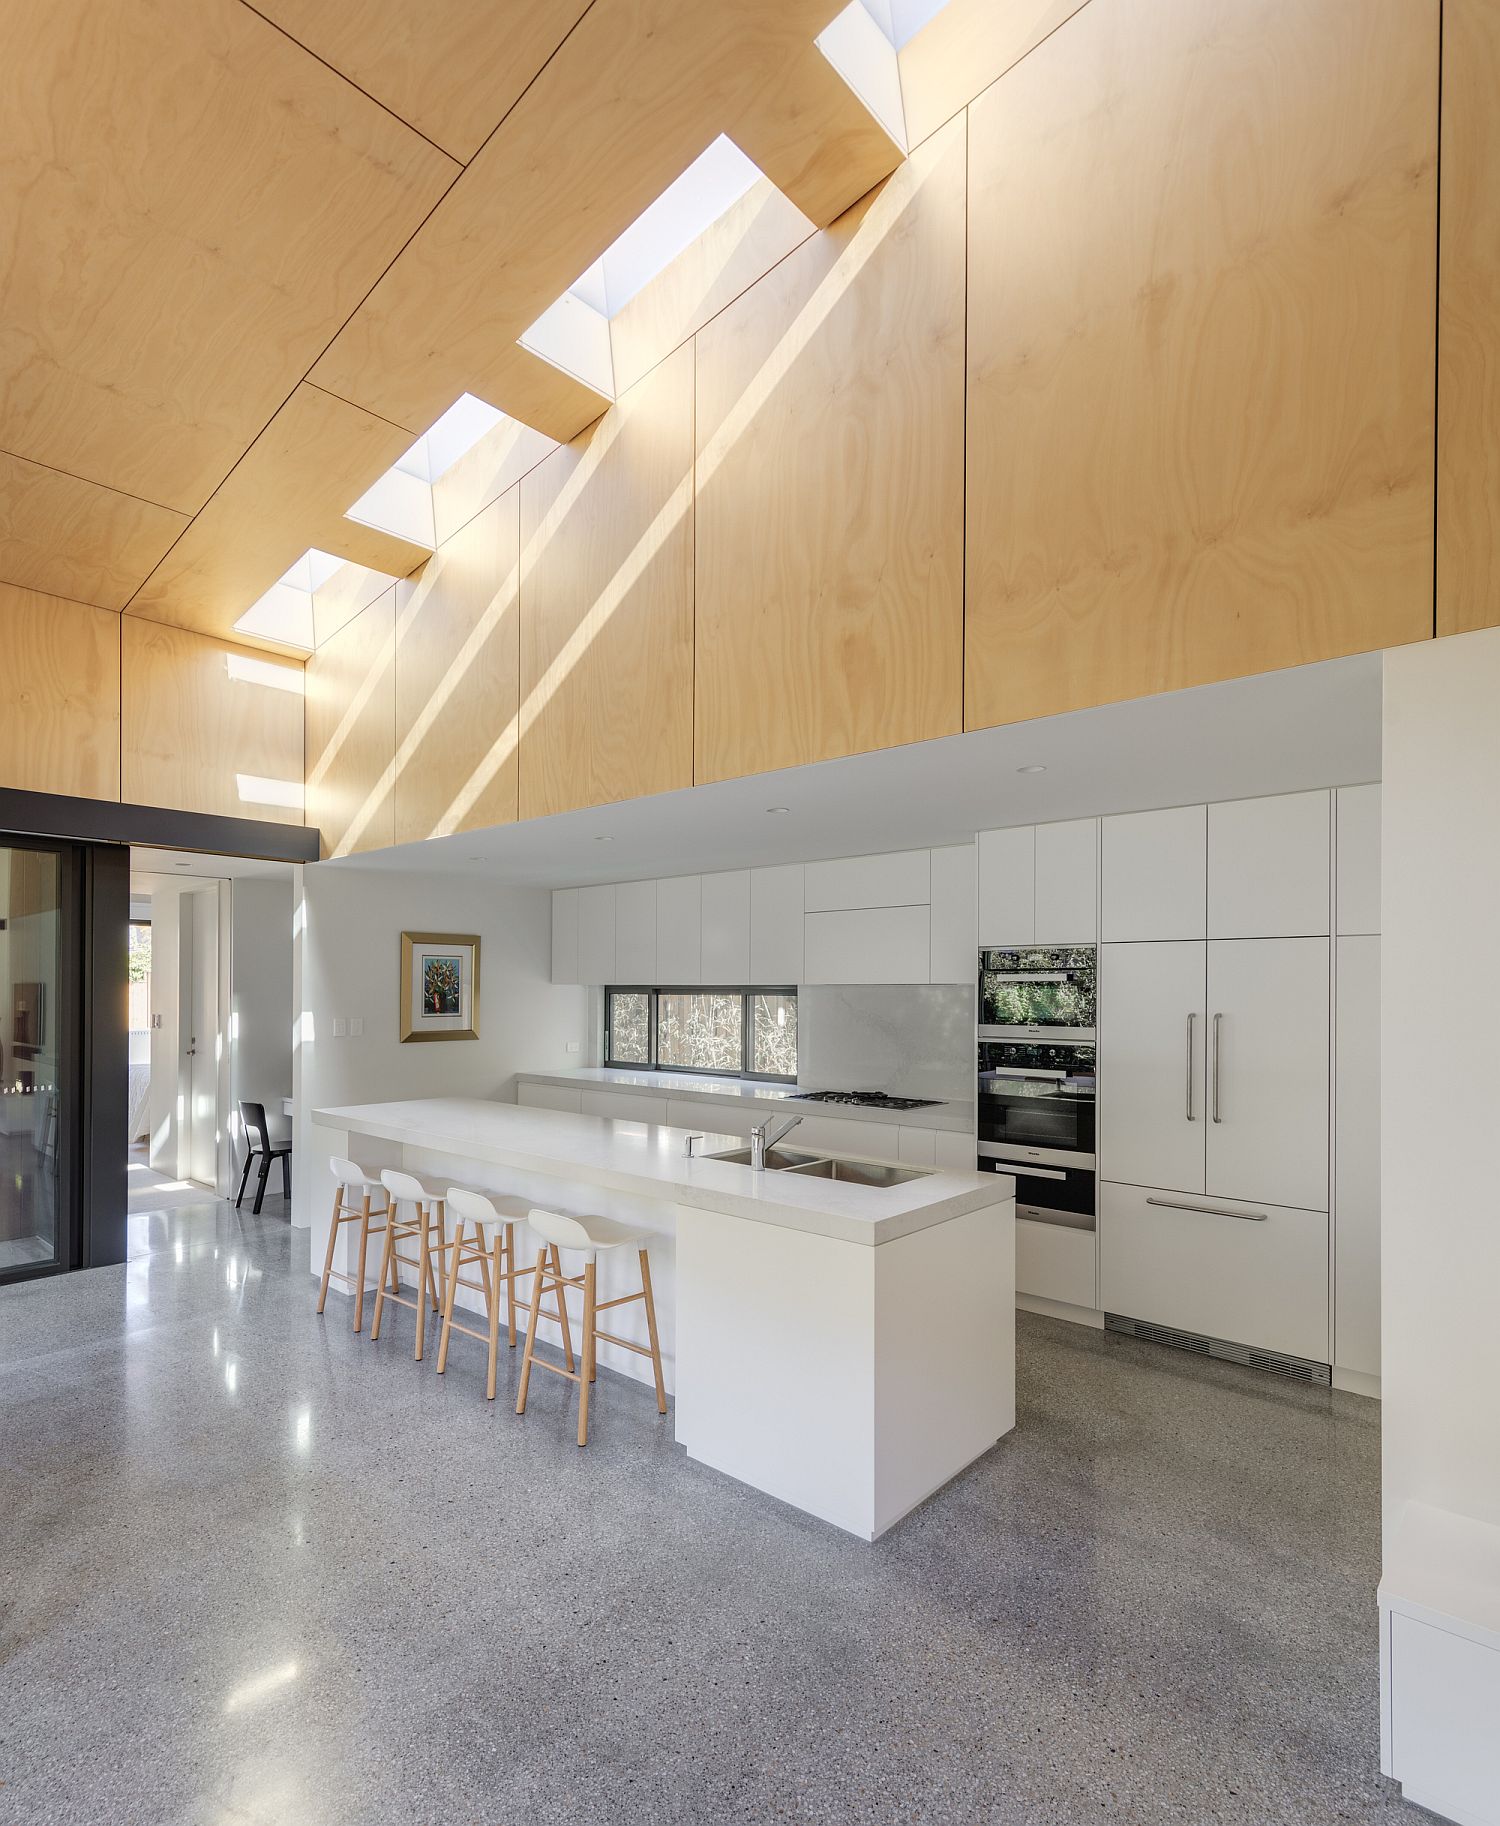 Smart-placement-of-ventilation-duct-illuminates-the-lower-level-kitchen-and-dining-area